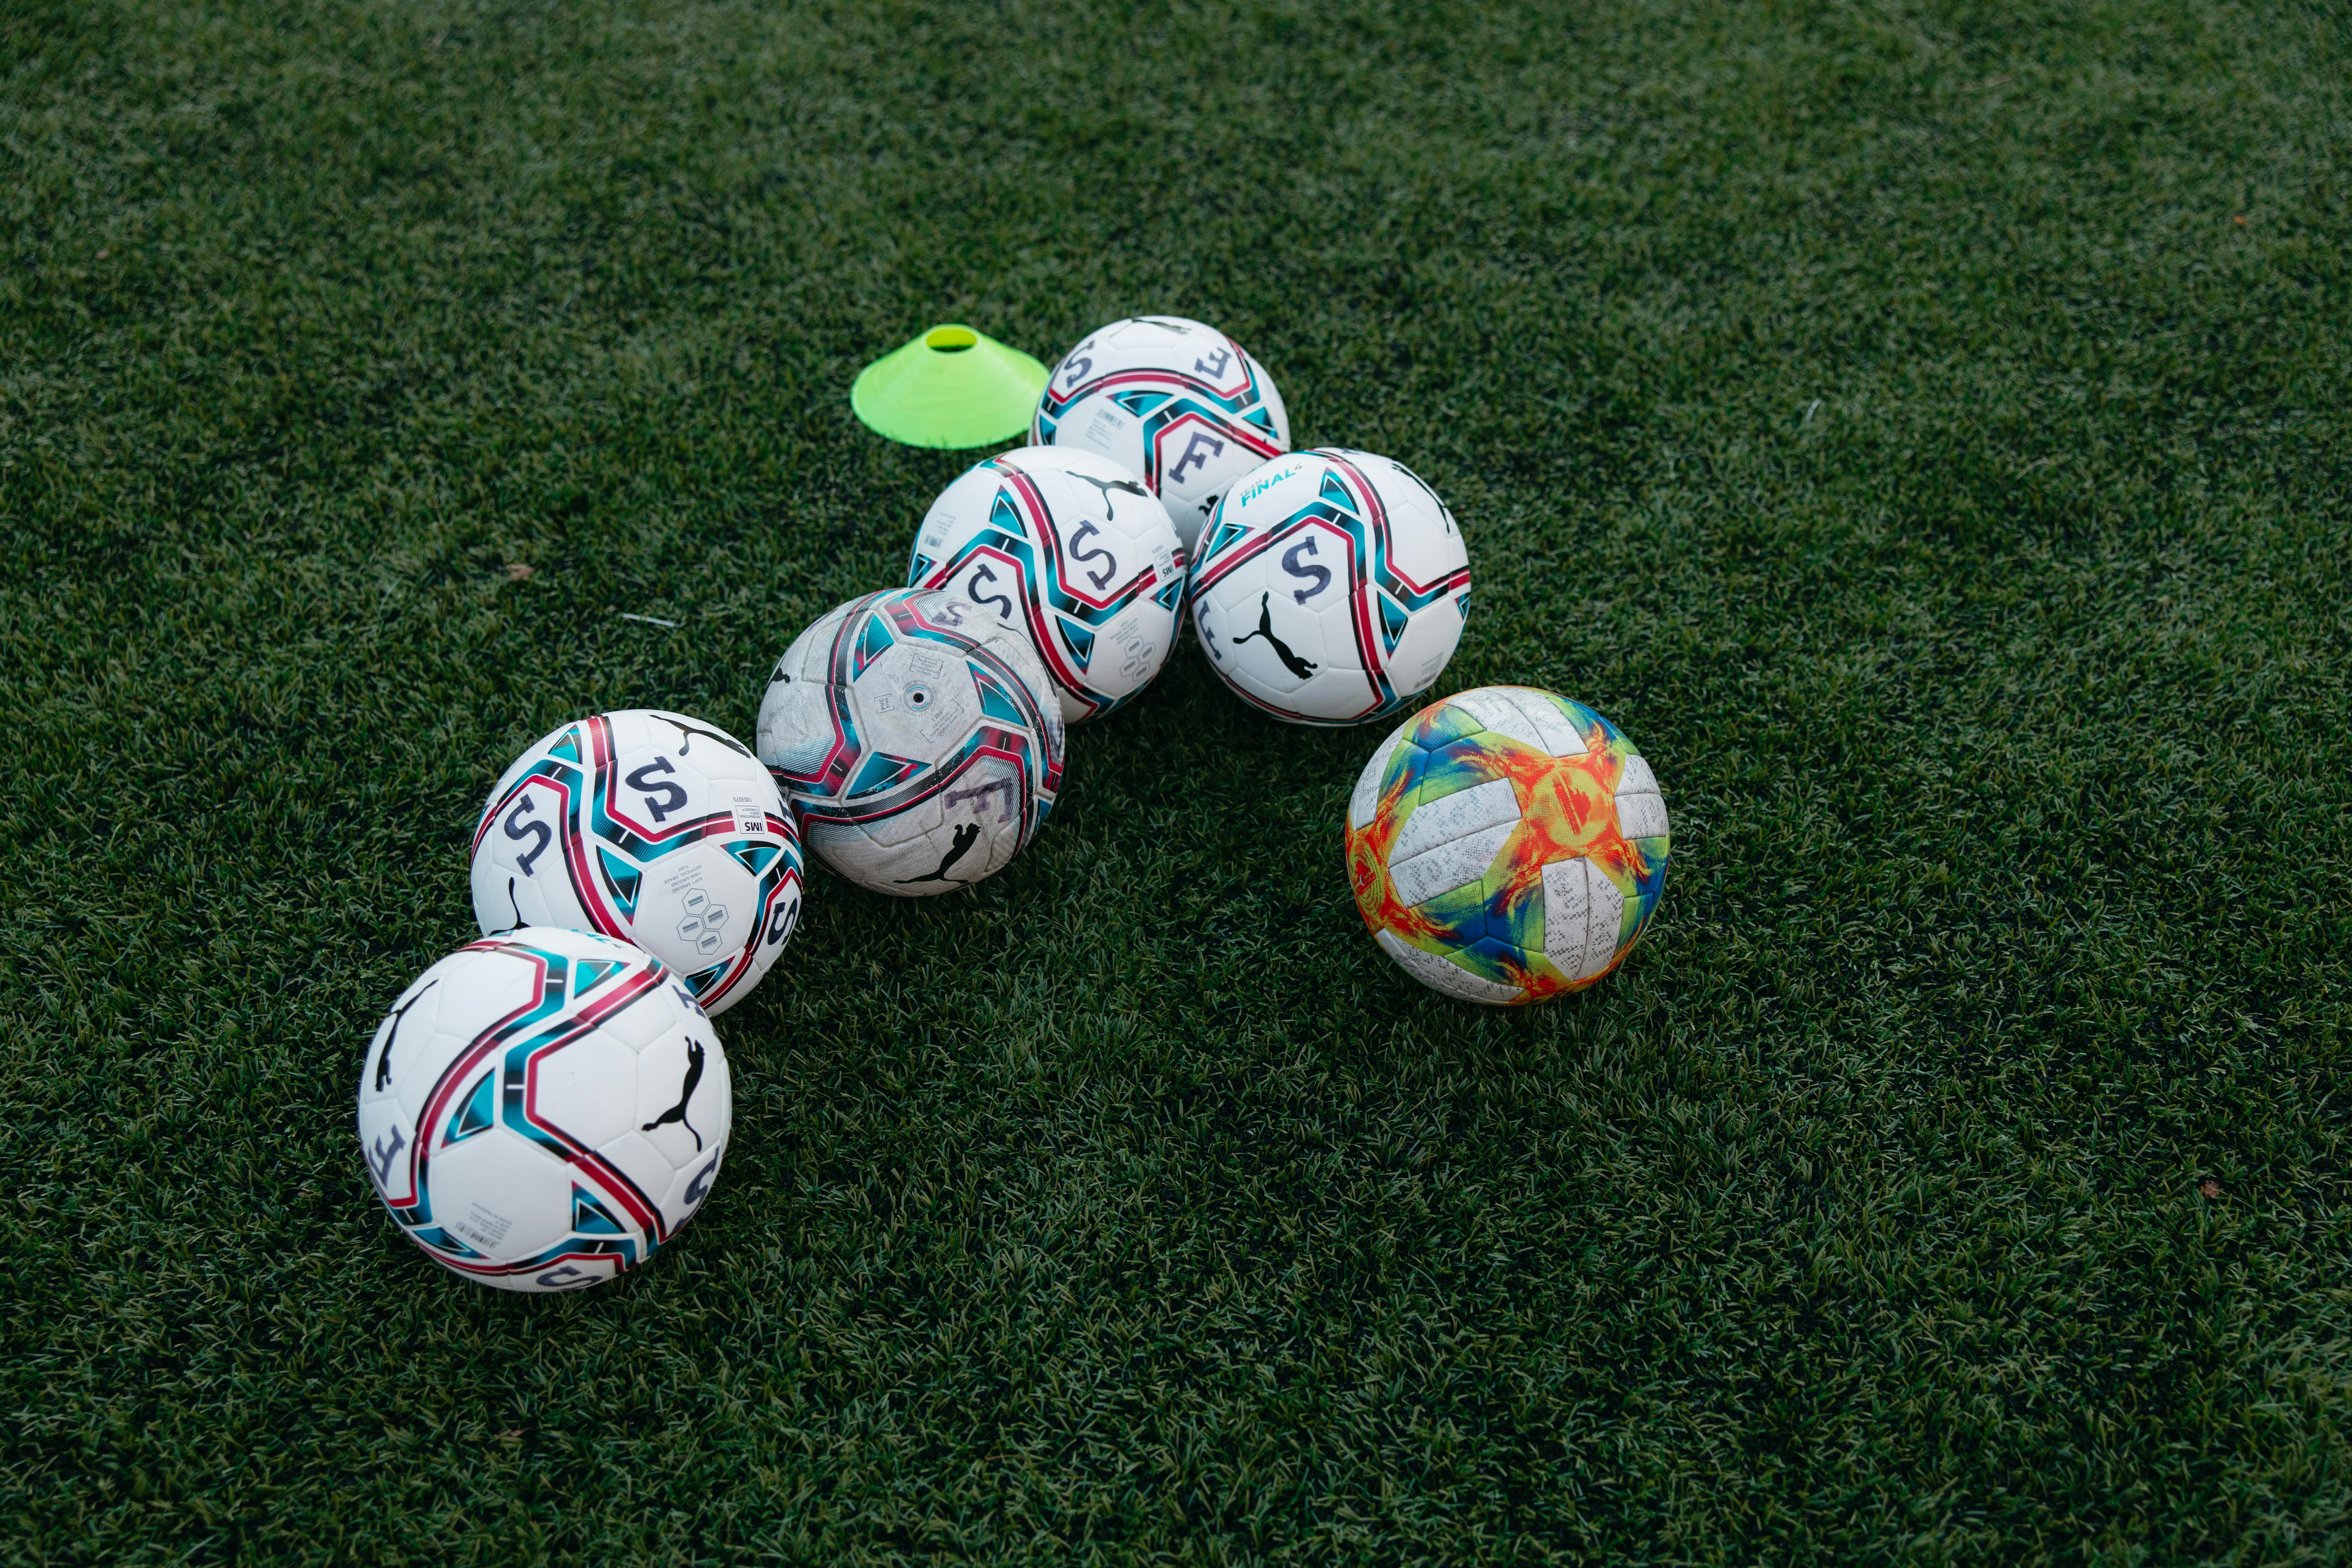 white and red soccer ball on green grass field